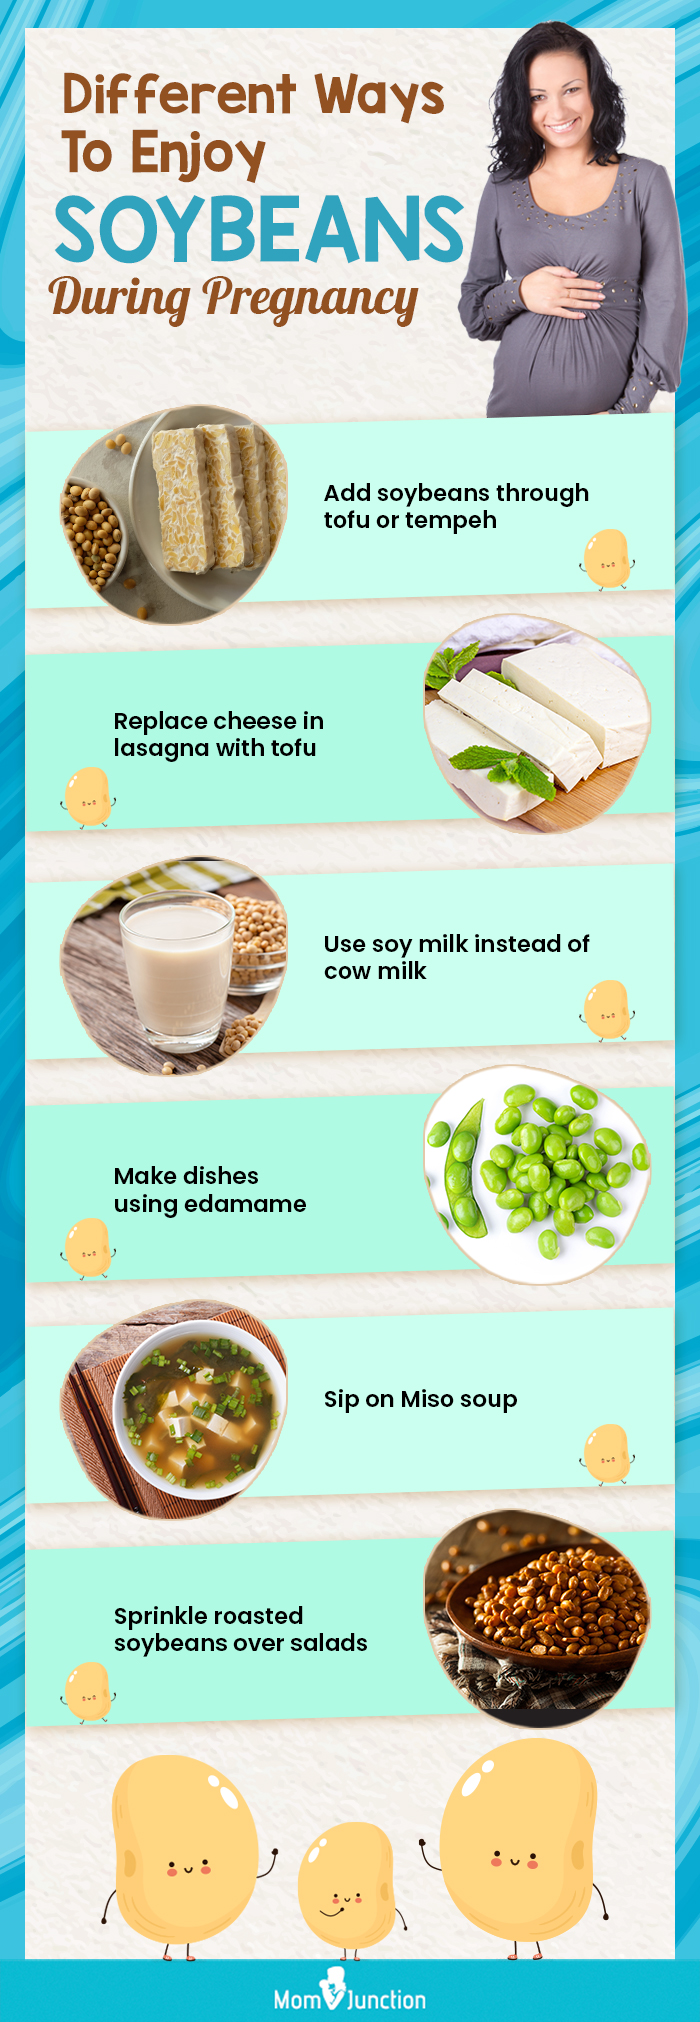 different ways to enjoy soybeans during pregnancy (infographic)